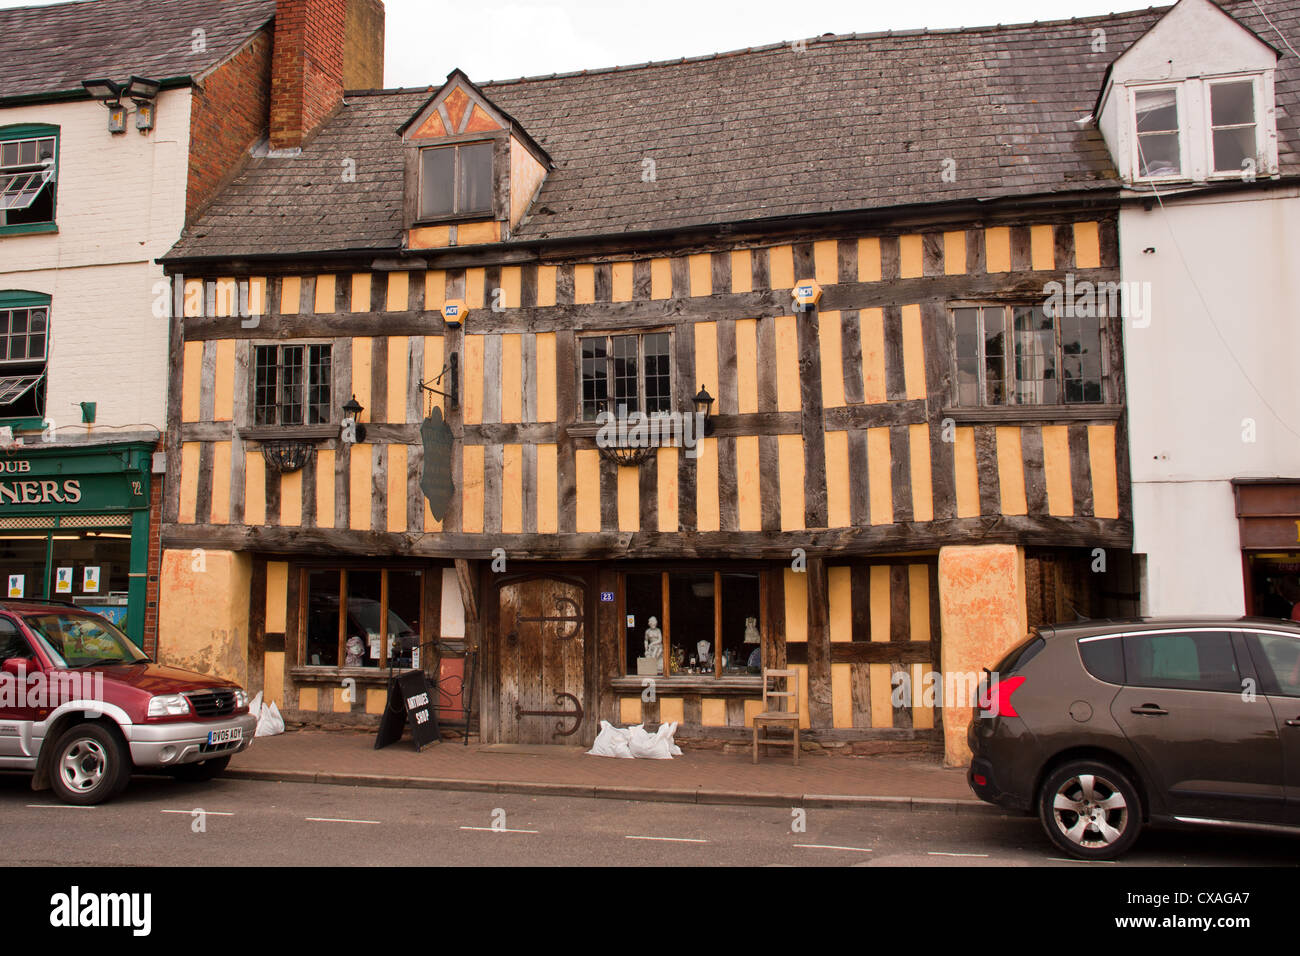 Historic Tudor style timber framed house dwelling probably built in mid 1500's, Ross on Wye, Herefordshire, England, UK. Stock Photo